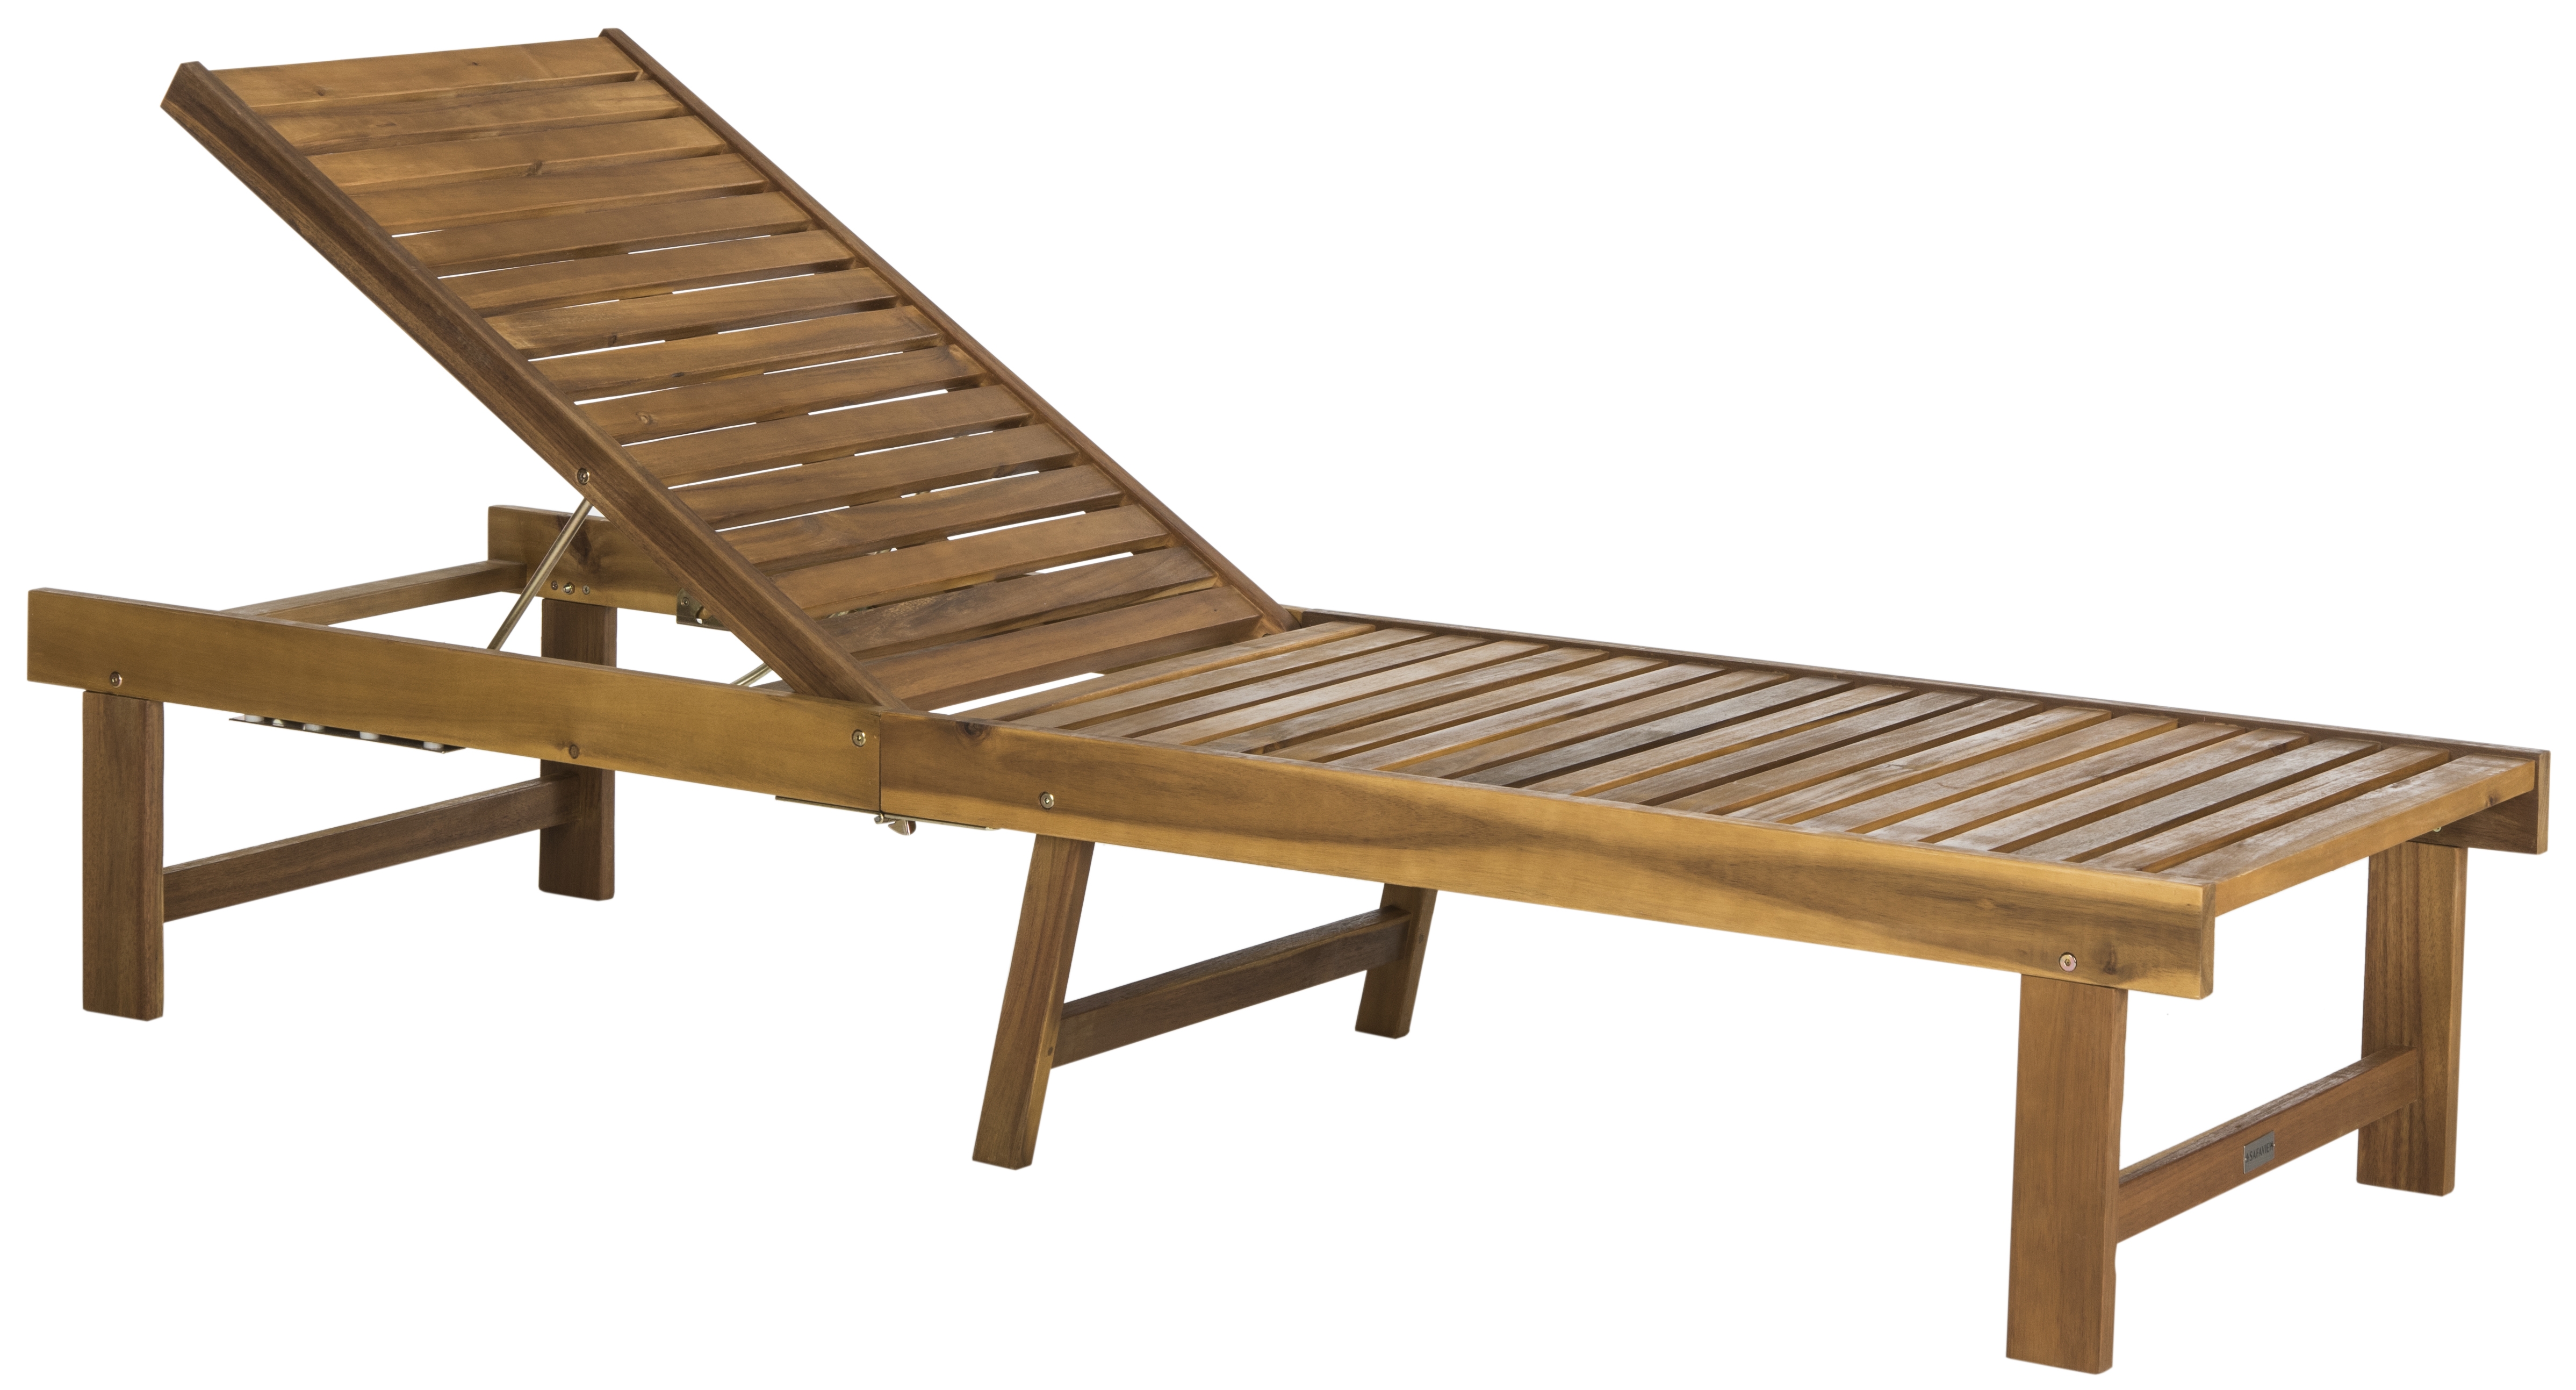 Inglewood Chaise Lounge Chair - Natural/Navy - Safavieh - Image 2